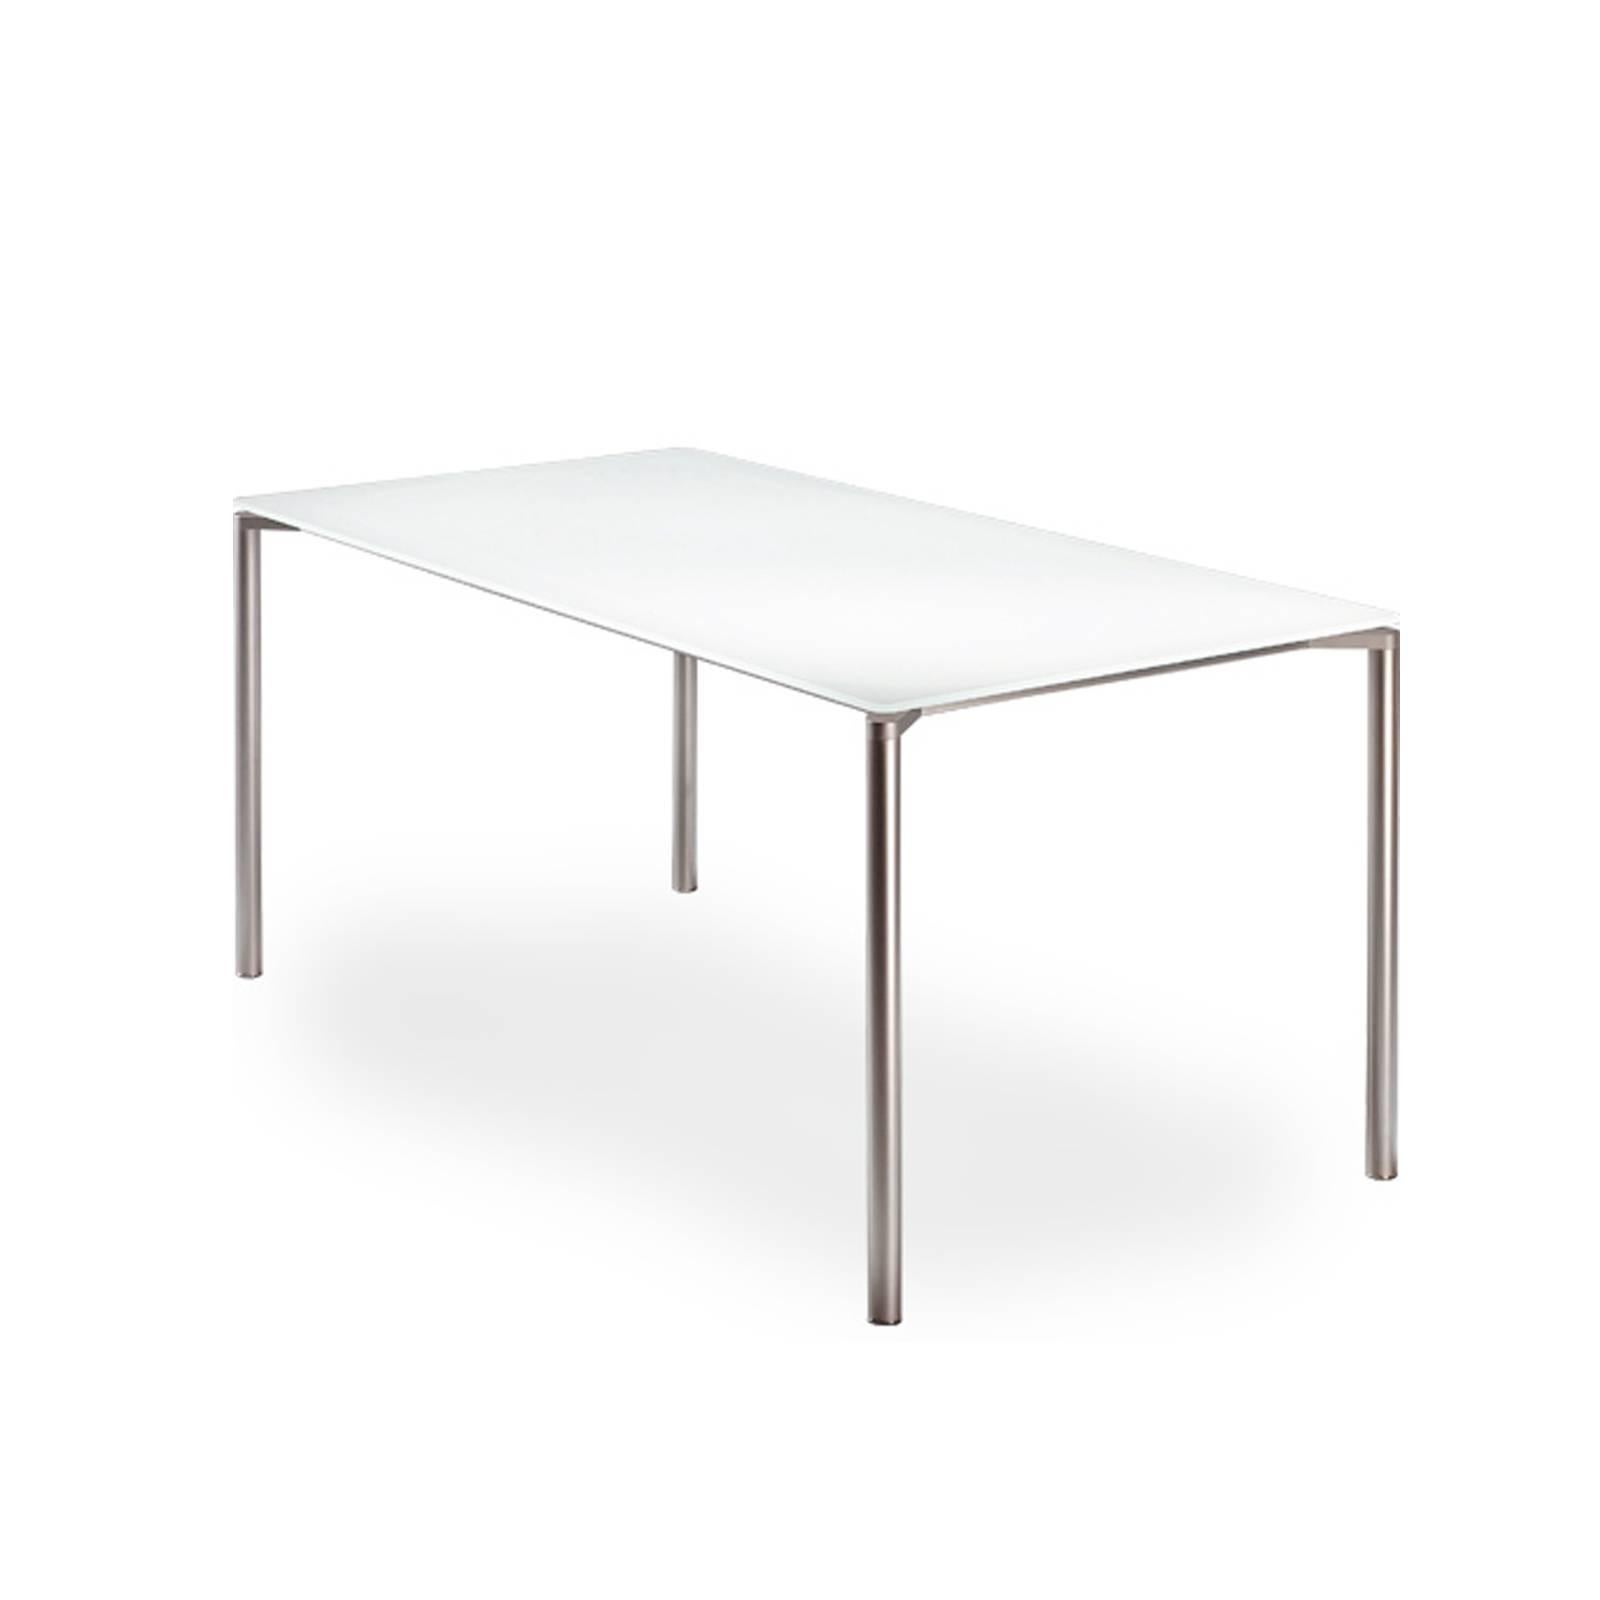 Stunning glass table by the Fritz Hansen designed by Pelikan design composed by a under-lacquered glass supported by cylindrical legs finished in a mirrored charmed steel.
The glass top sits just millimetres from the tops of the legs giving an